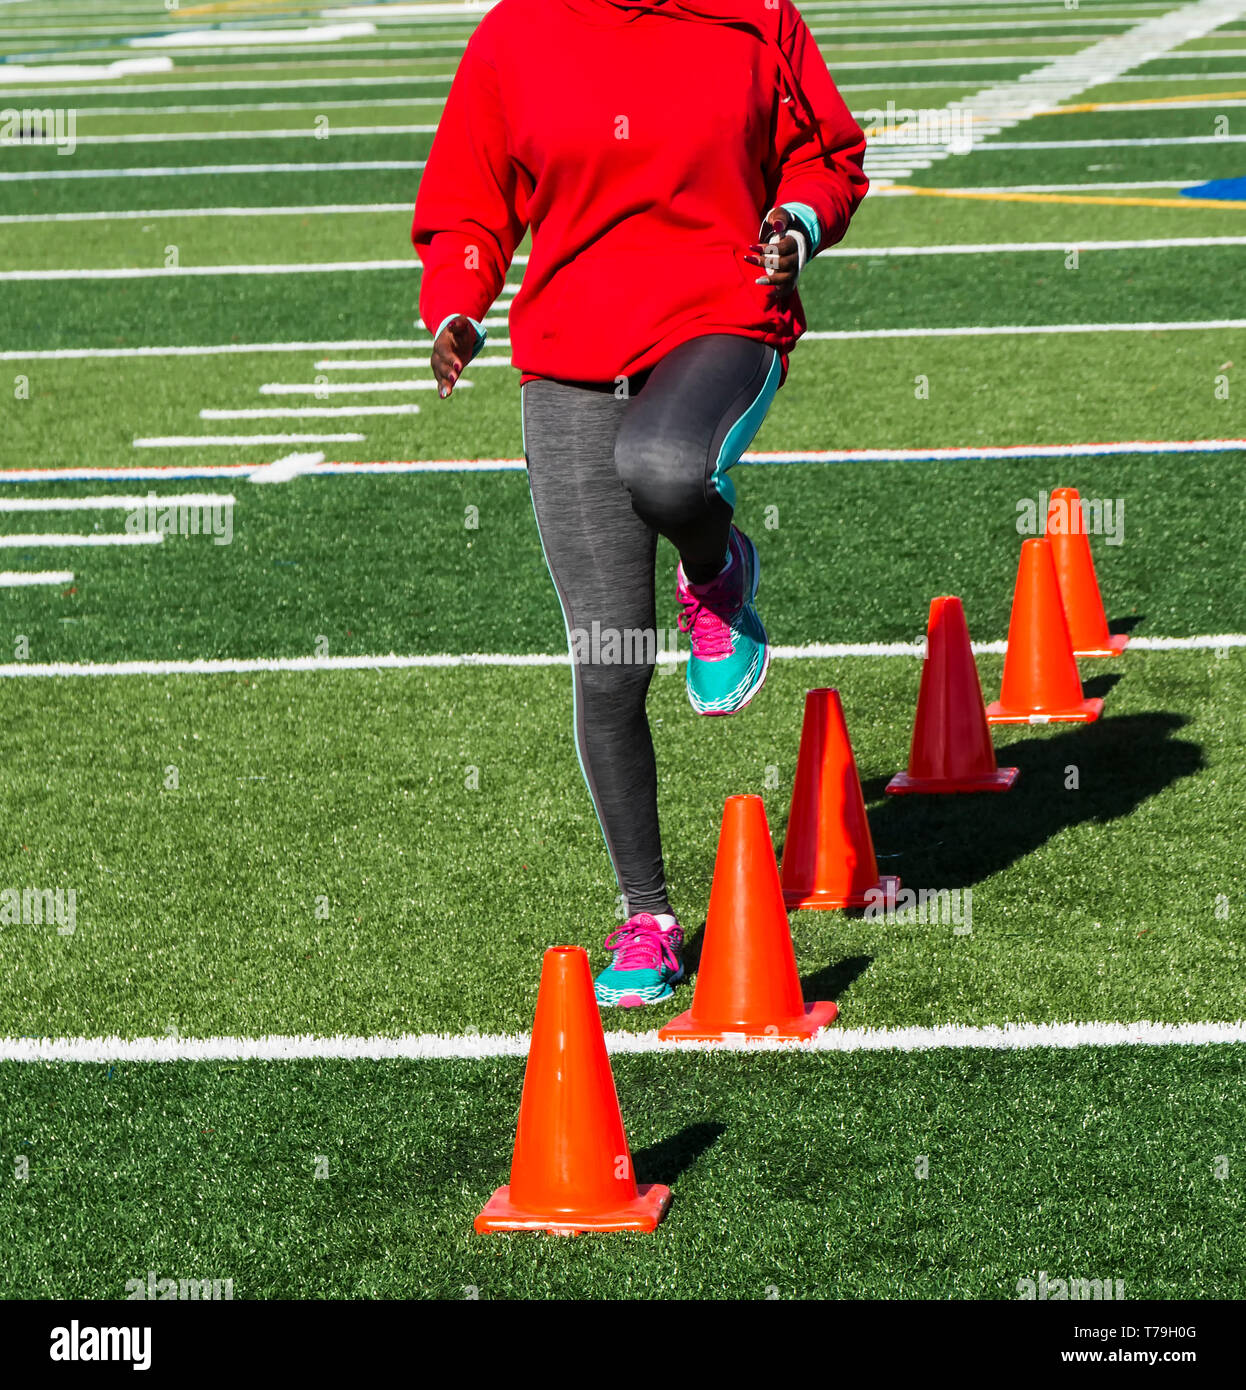 A high school female track and field runner steeping over orange cones performing speed drill on a green turf field. Stock Photo